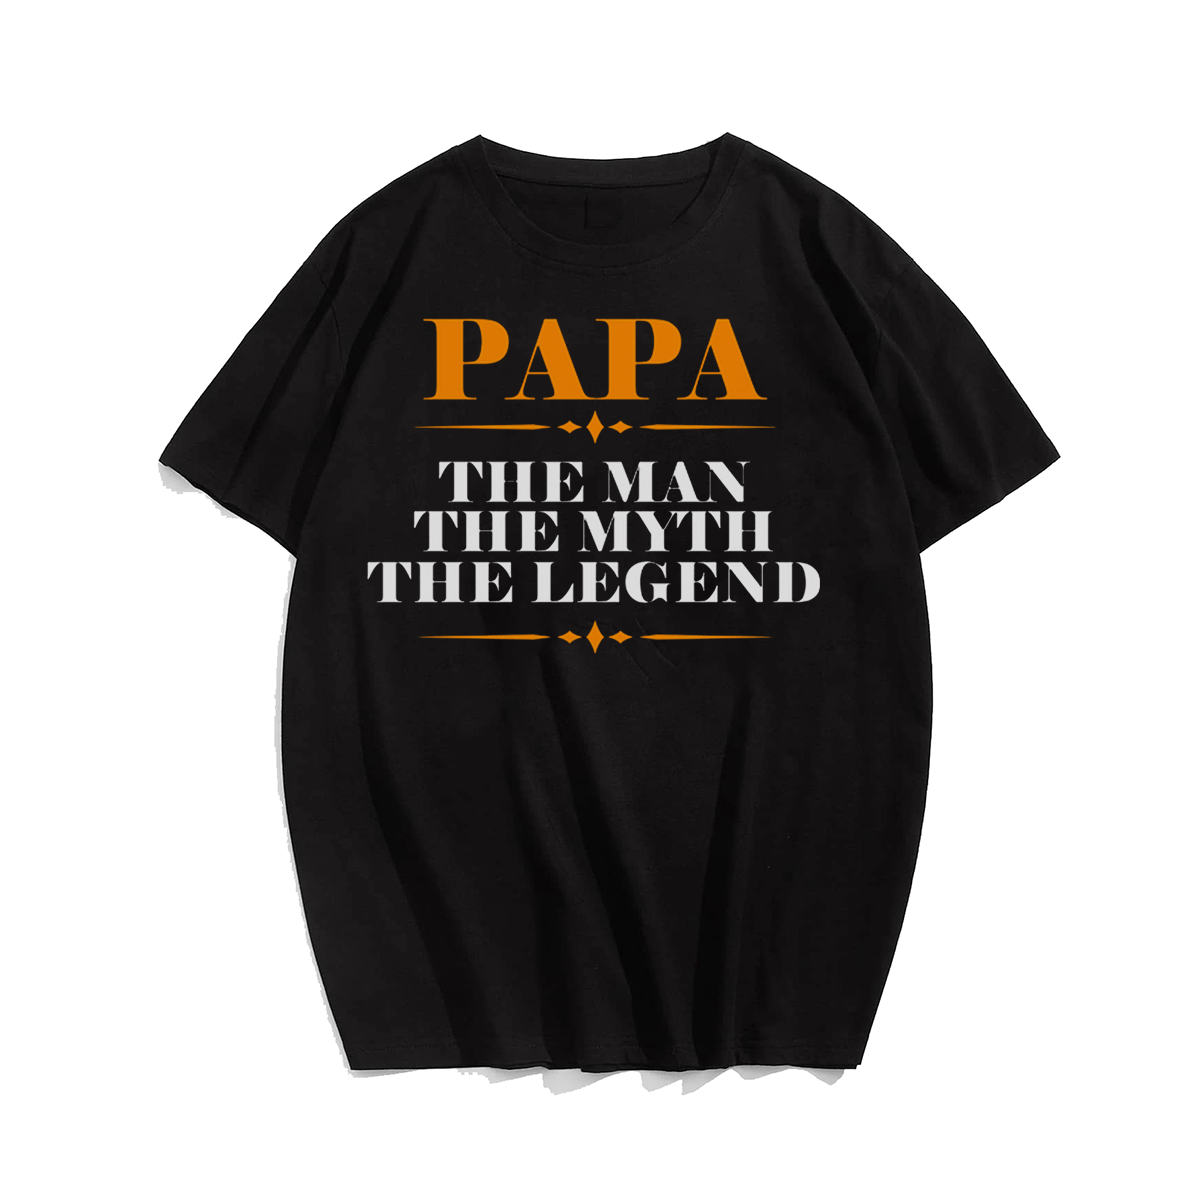 Papa The Man The Myth The Legend T-shirt for Men, Oversize Plus Size Big & Tall Man Clothing